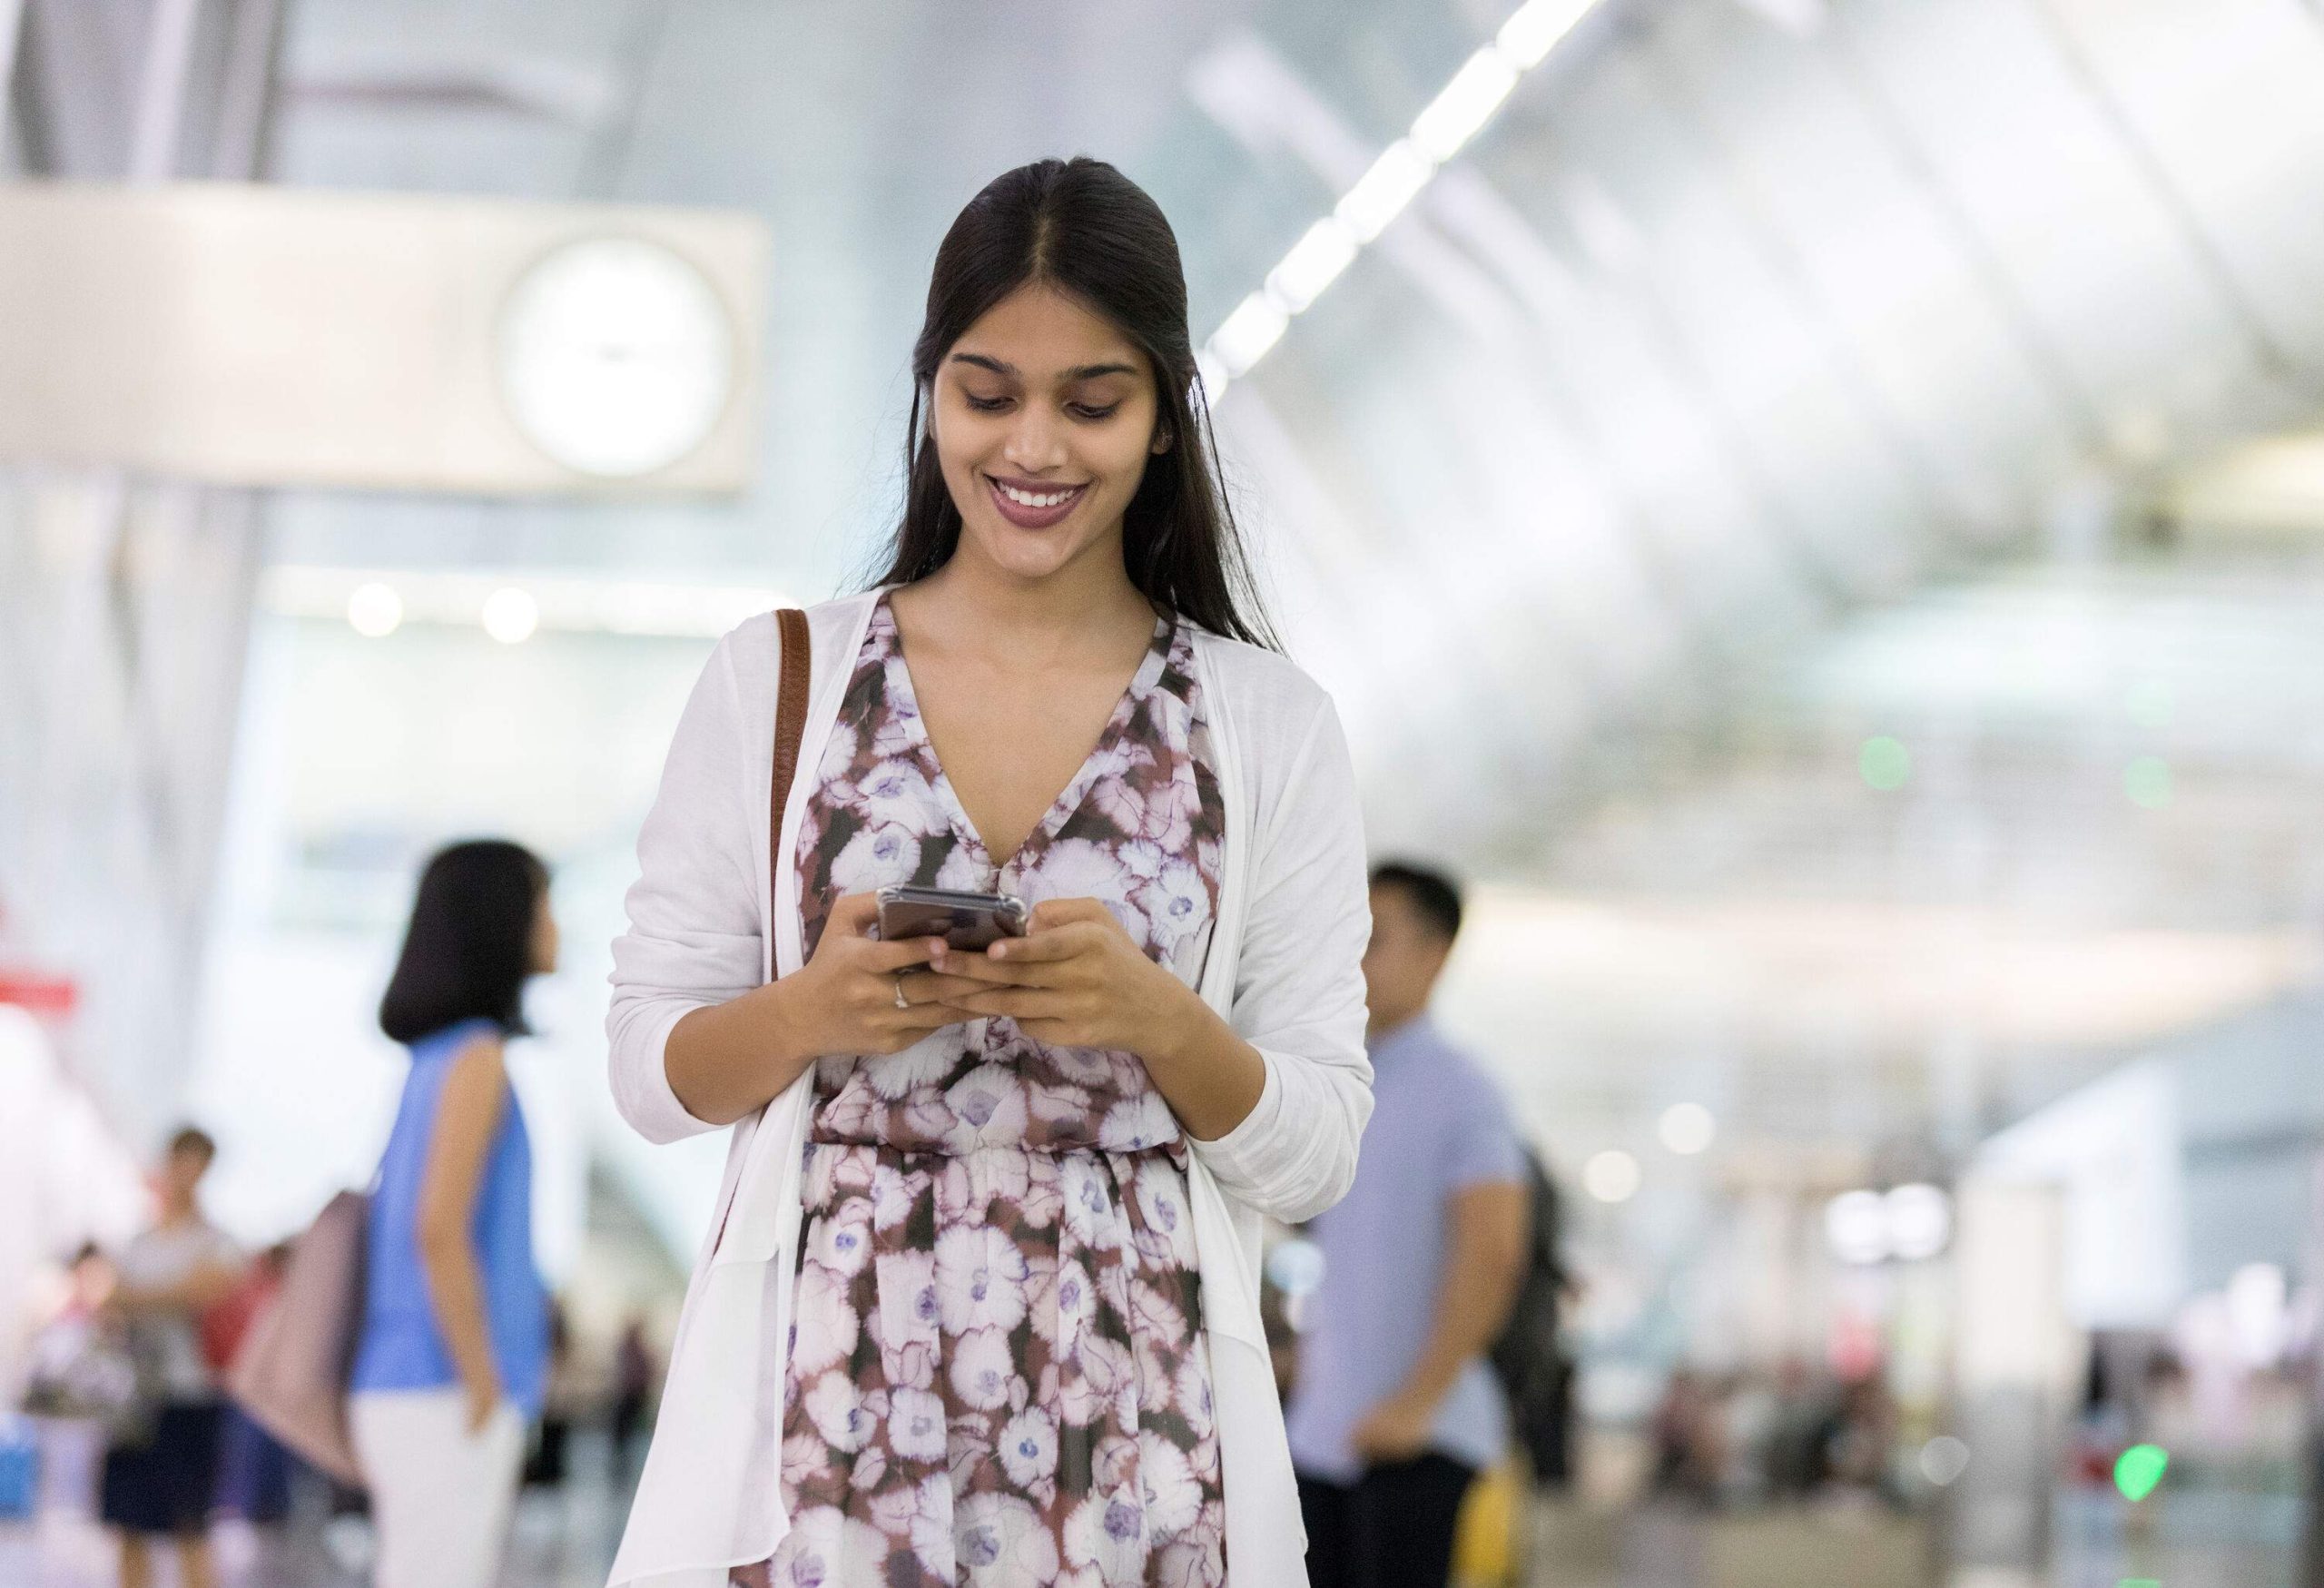 A raven-haired woman wearing a white cardigan over a nice dress checking on her phone while standing at an airport.